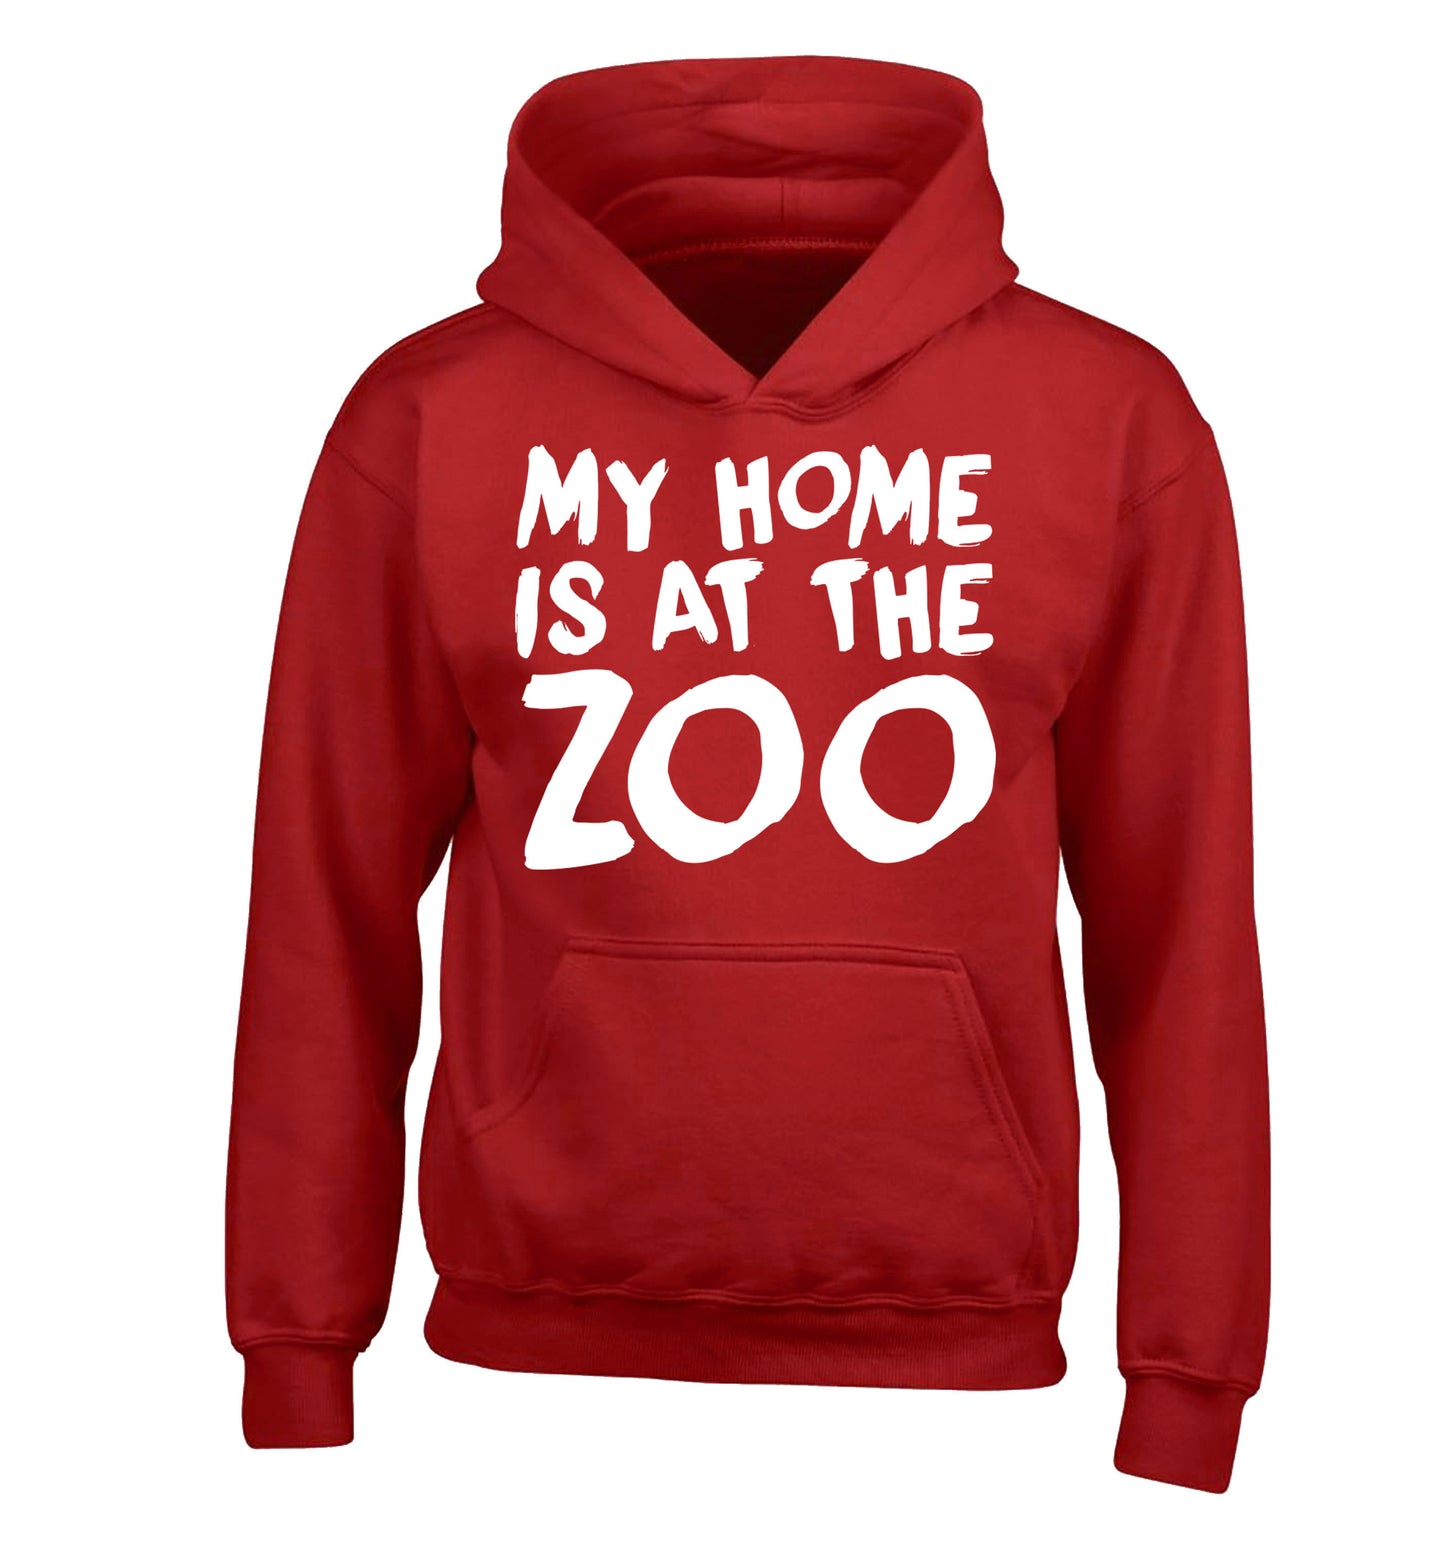 My home is at the zoo children's red hoodie 12-14 Years